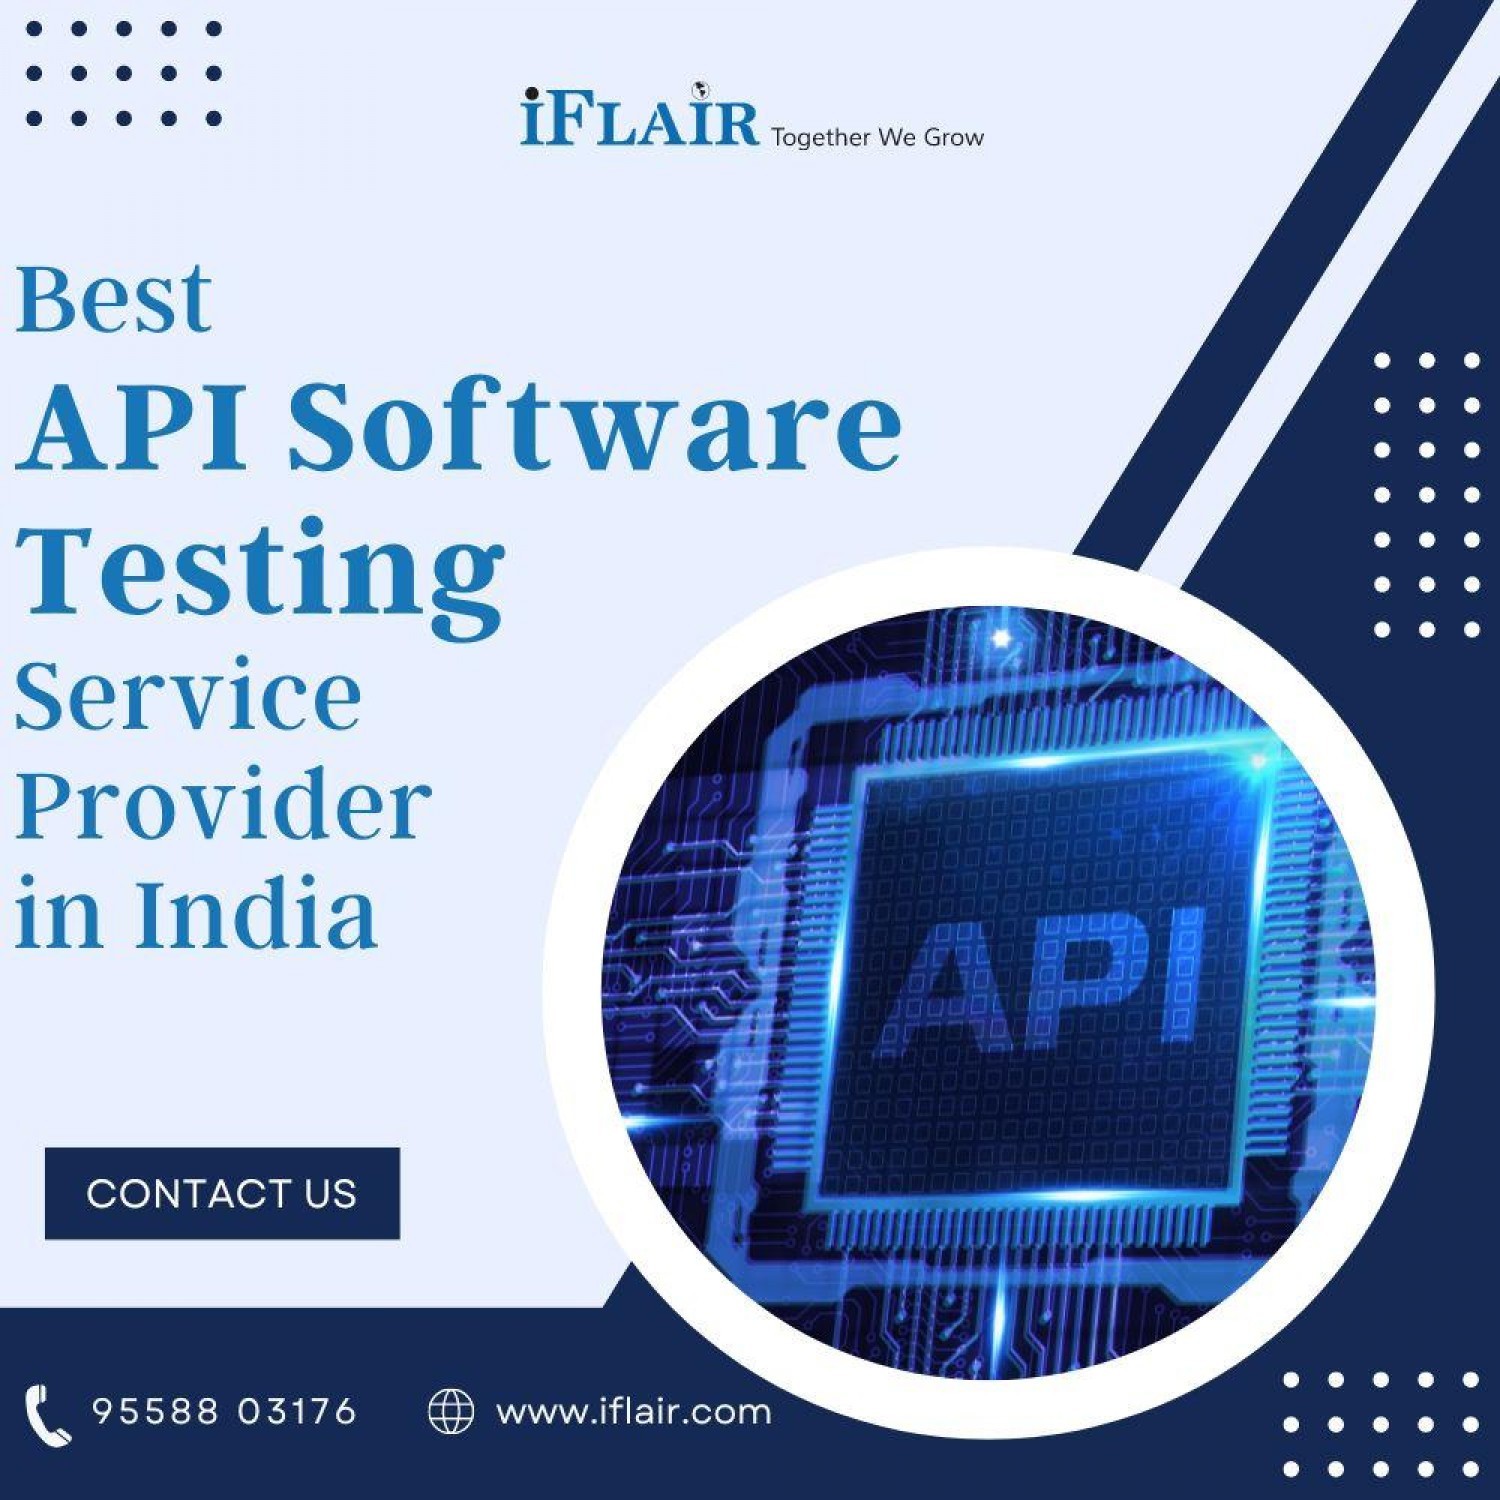 Best API Software Testing Service Provider in India